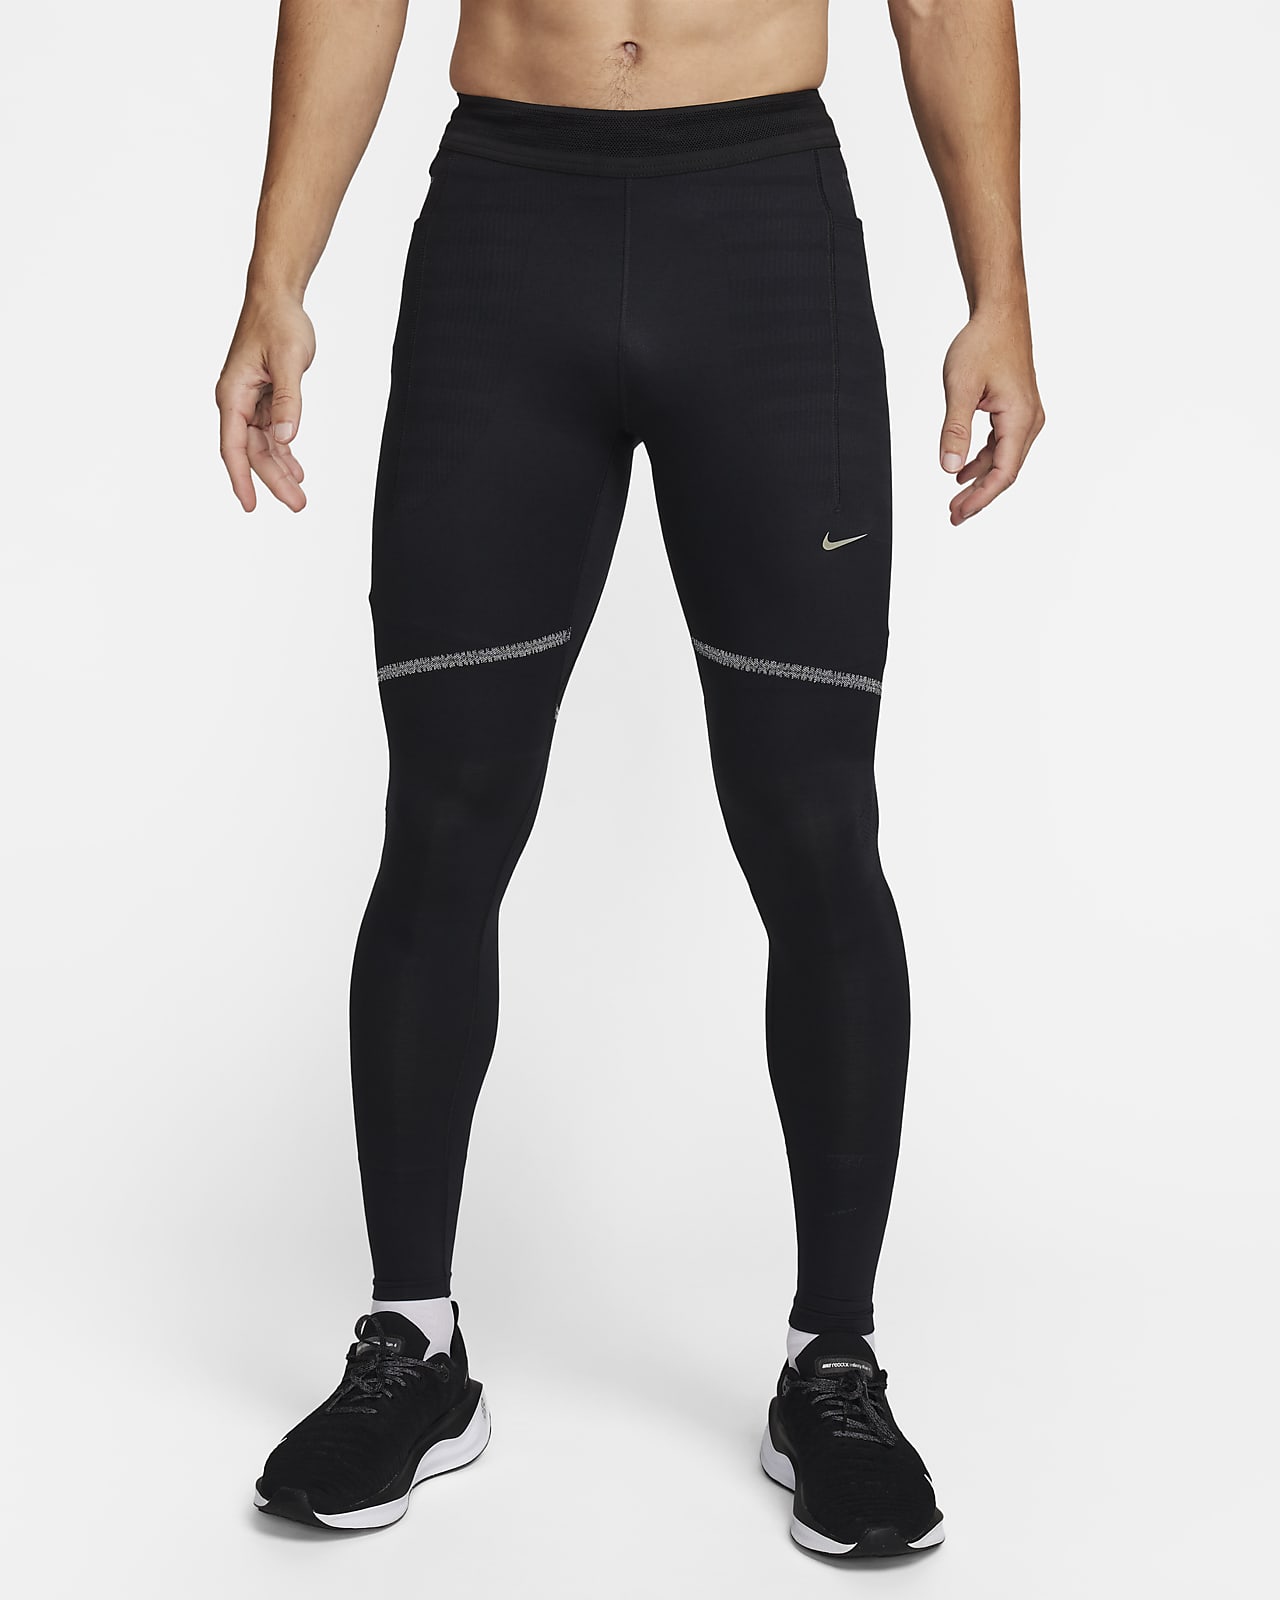 https://static.nike.com/a/images/t_PDP_1280_v1/f_auto,q_auto:eco/9e610f41-5cae-4768-bb42-a8da540fe091/running-division-dri-fit-adv-running-tights-ZbwKrH.png